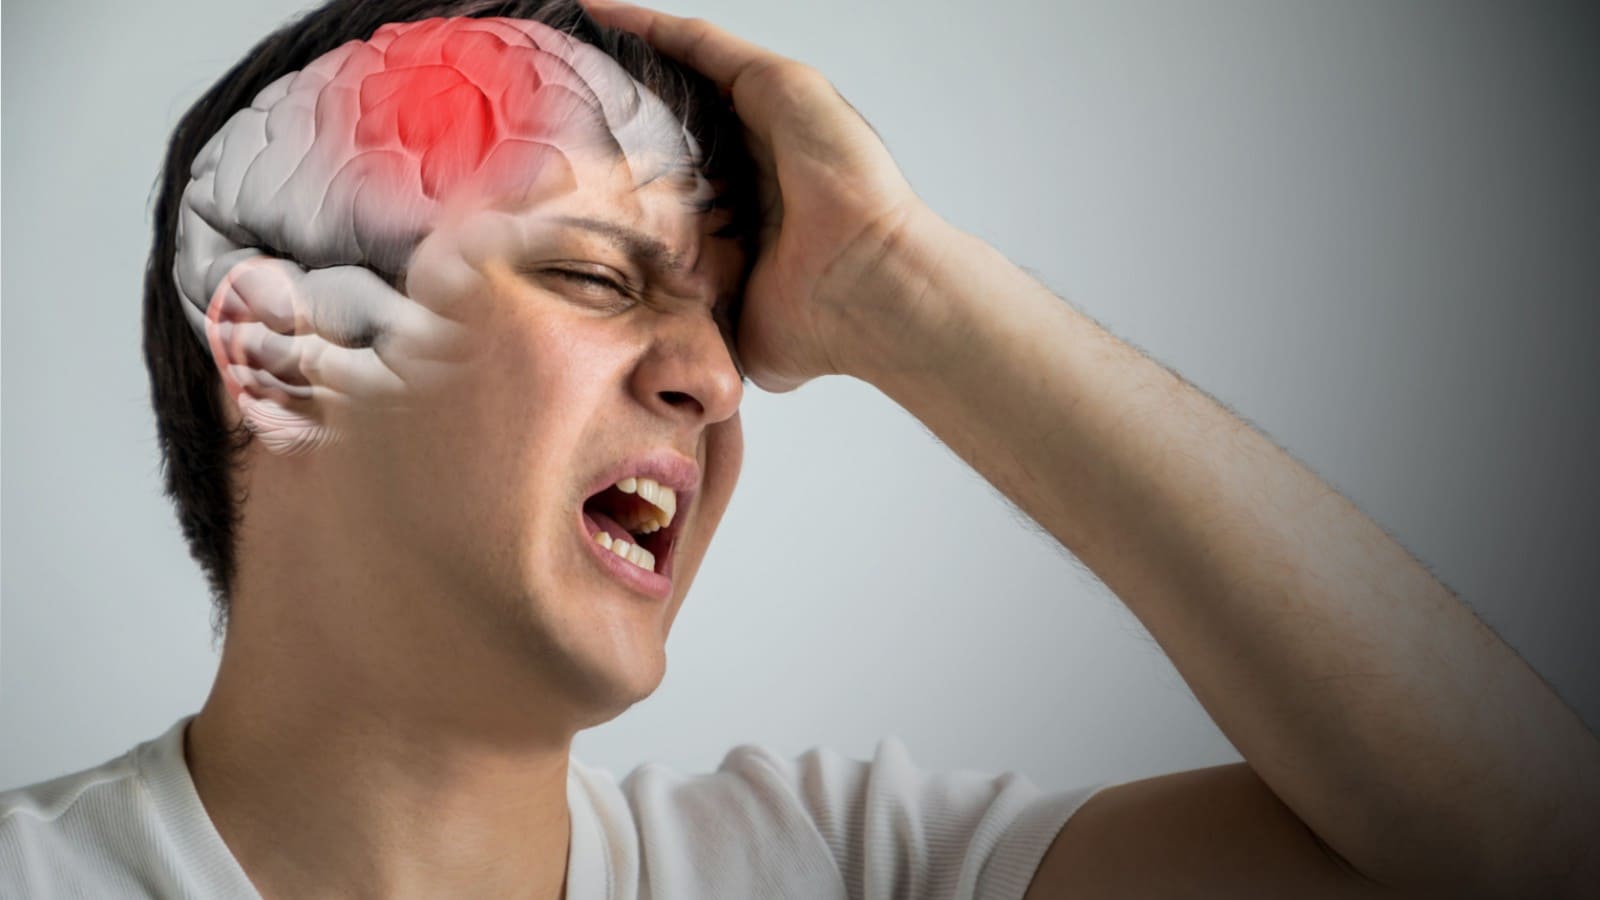 Man with headache with an illustration of a brain